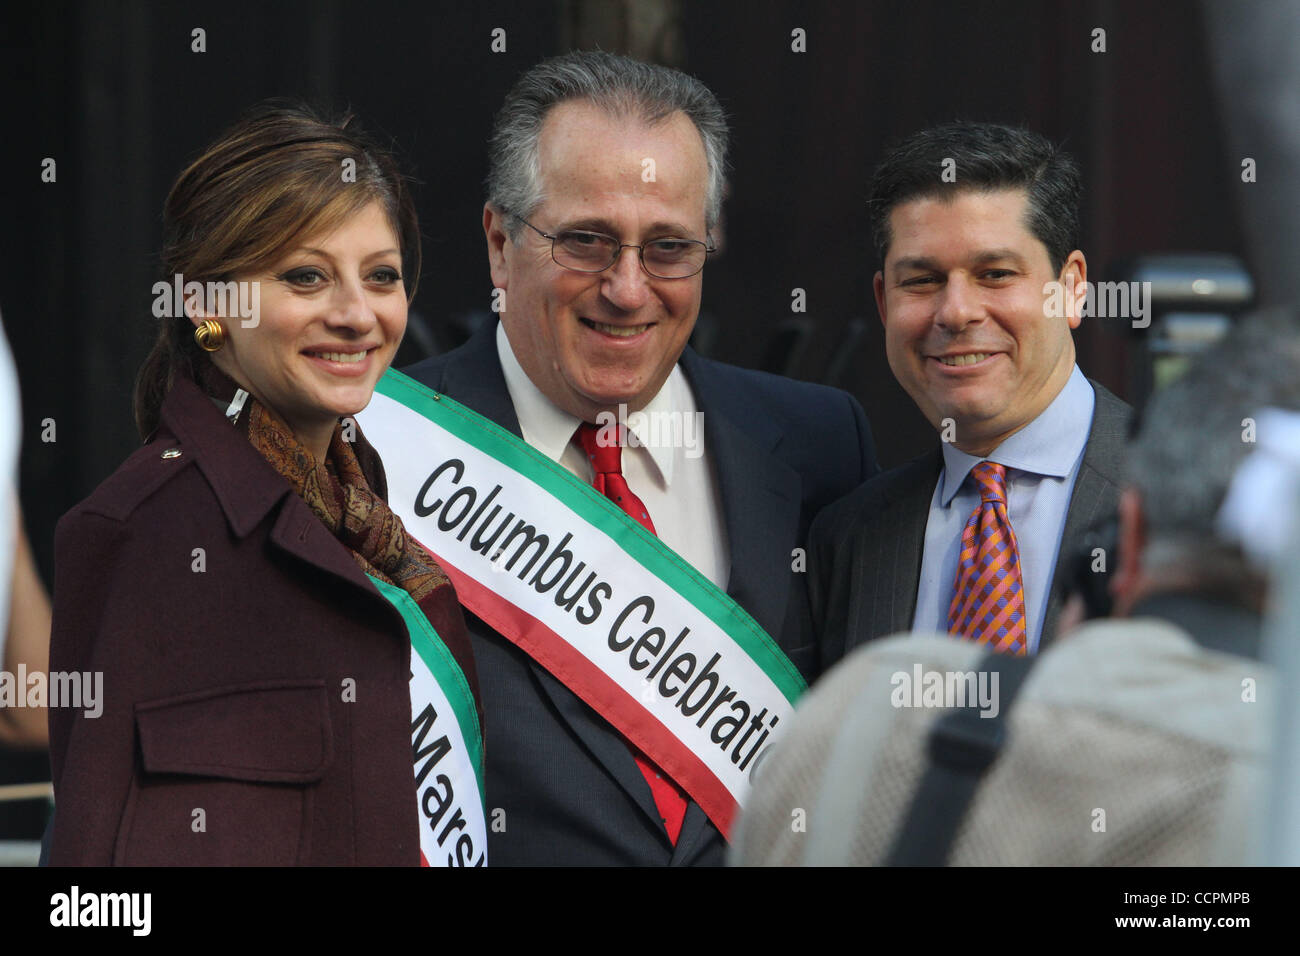 MSNBC anchor Maria Bartiromo,  the Grand Marshall of the New York City Columbus Day Parade posing for pictures during the celebration. Photo Credit: Mariela Lombard/ZUMA Press. Stock Photo